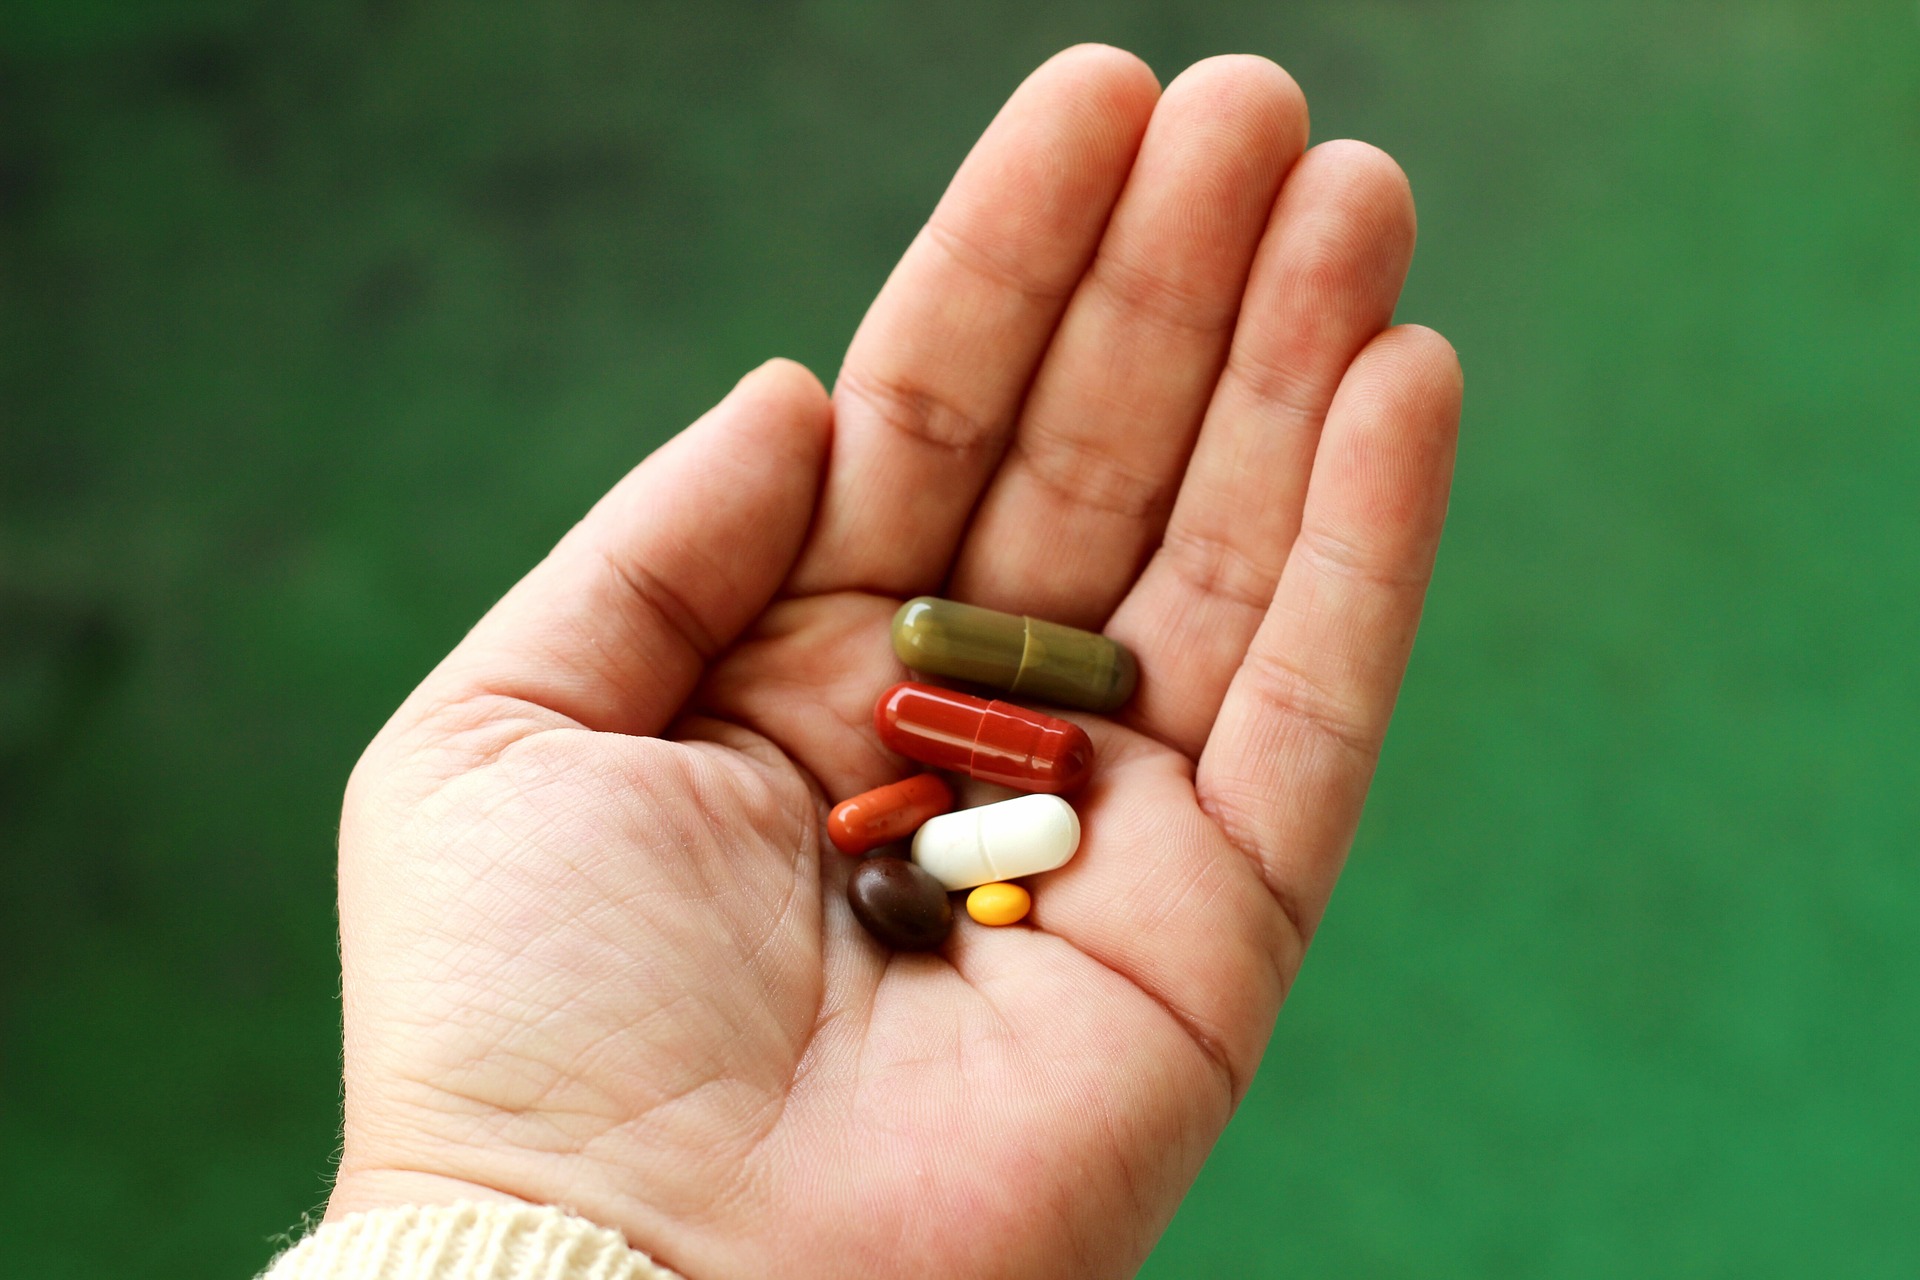 Supplements in palm of hand with green background